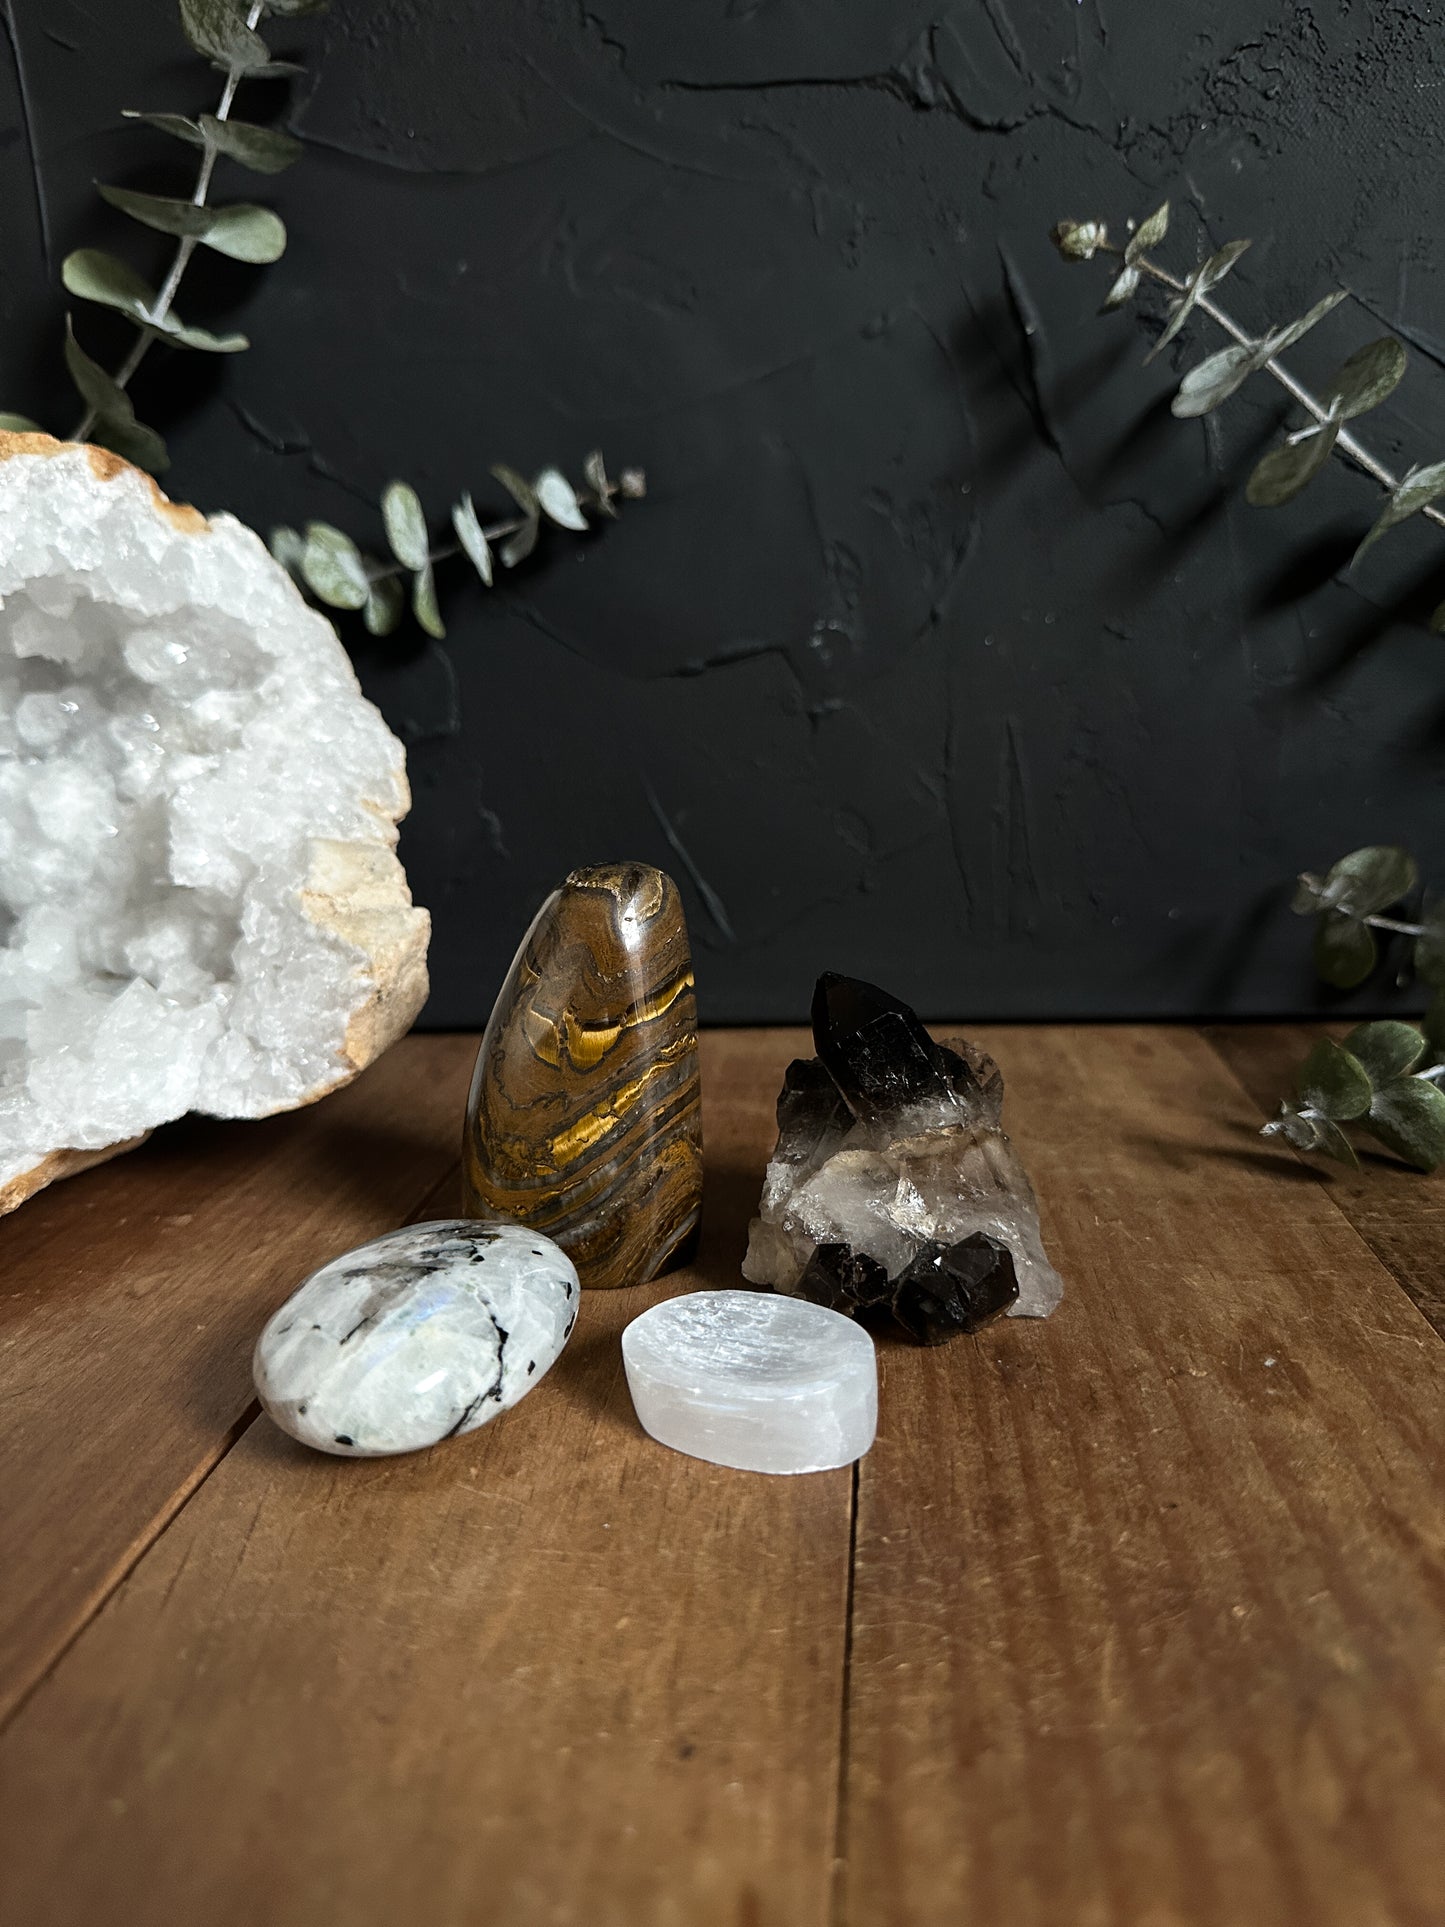 This Crystal Healing Pouch is intended for calming Anxiety. The perfect gift or Crystal Set for Anxiety includes Tiger eye, Smoky Quartz, selenite and moonstone. 